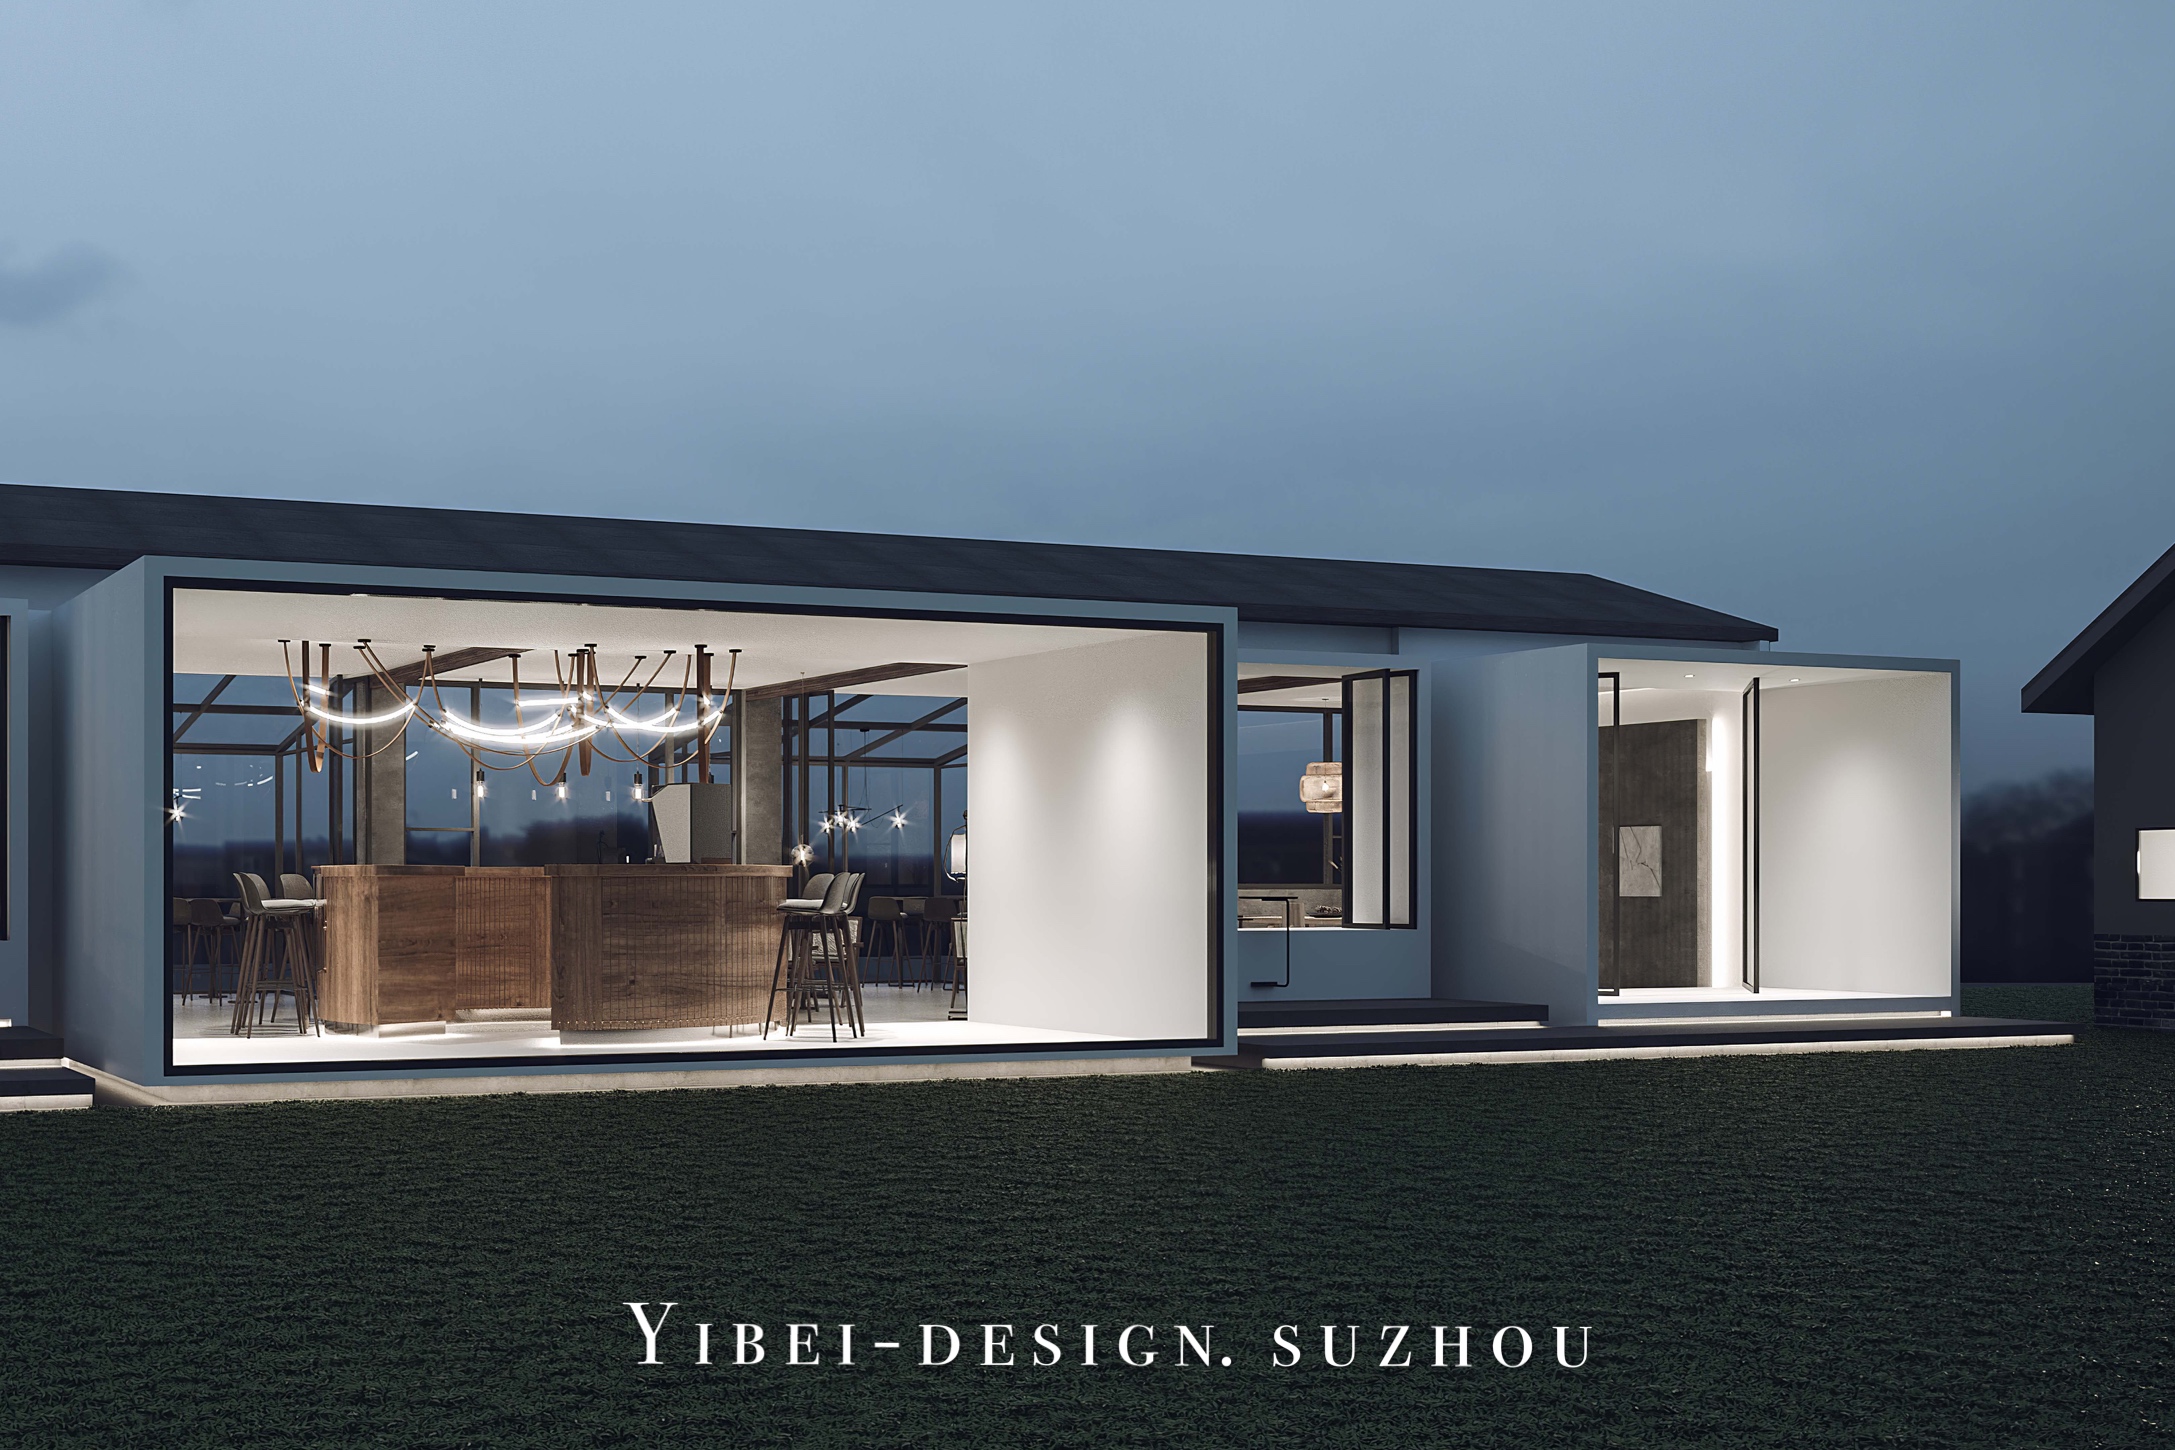 YIBEI   DESIGN   SUZHOUTHE BESTTHE ONLY ONE浪漫的情调，从这里开始！The romance starts here!动...